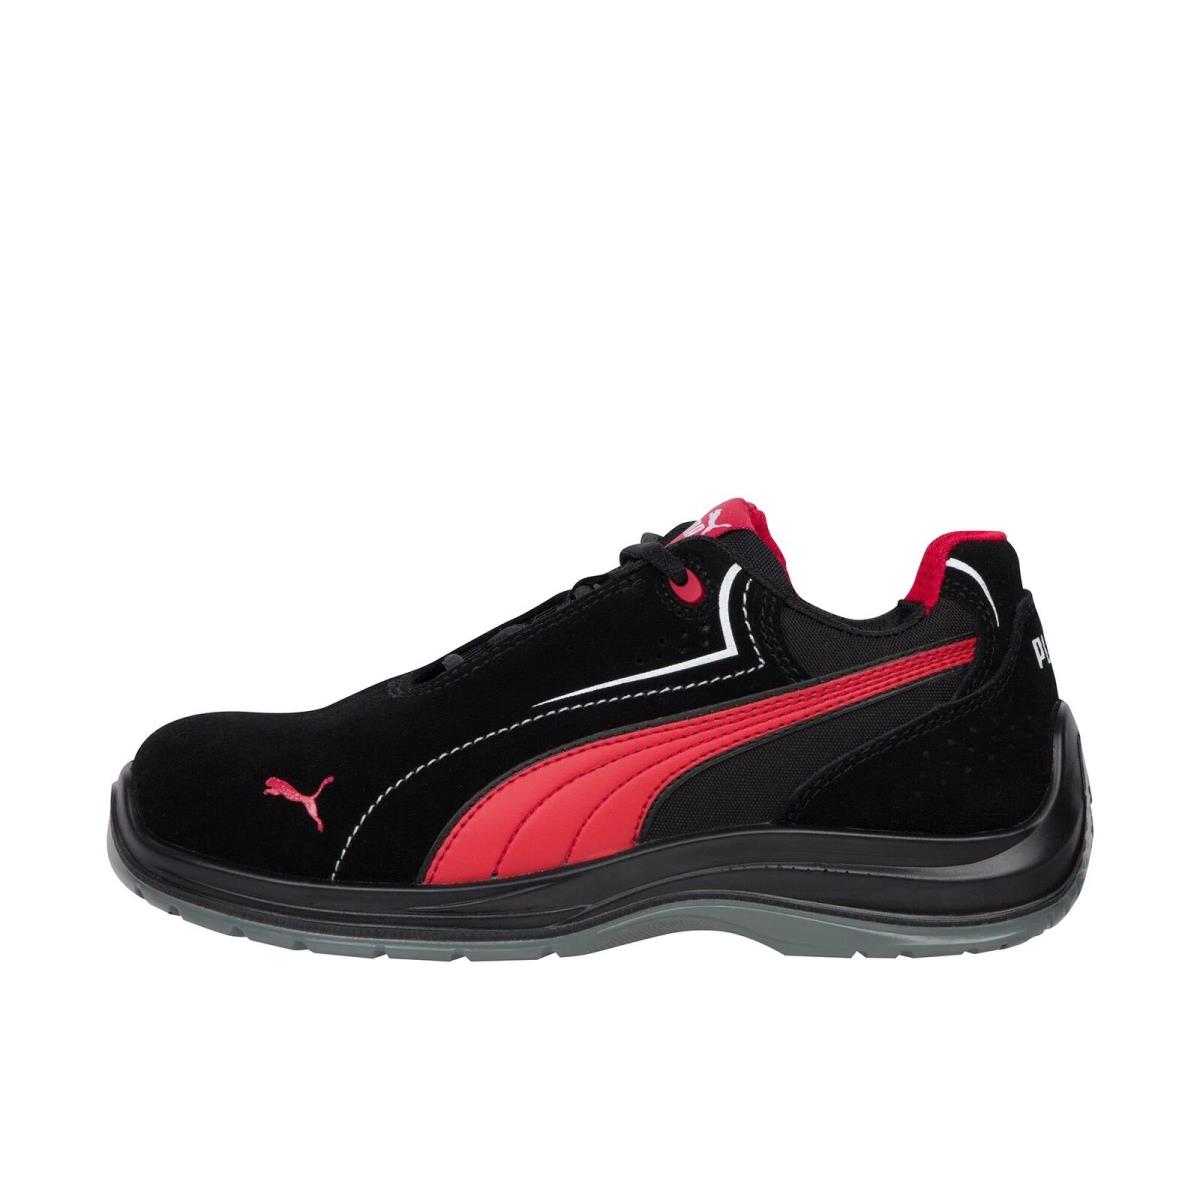 Puma Safety Touring Low Composite Toe Black Suede